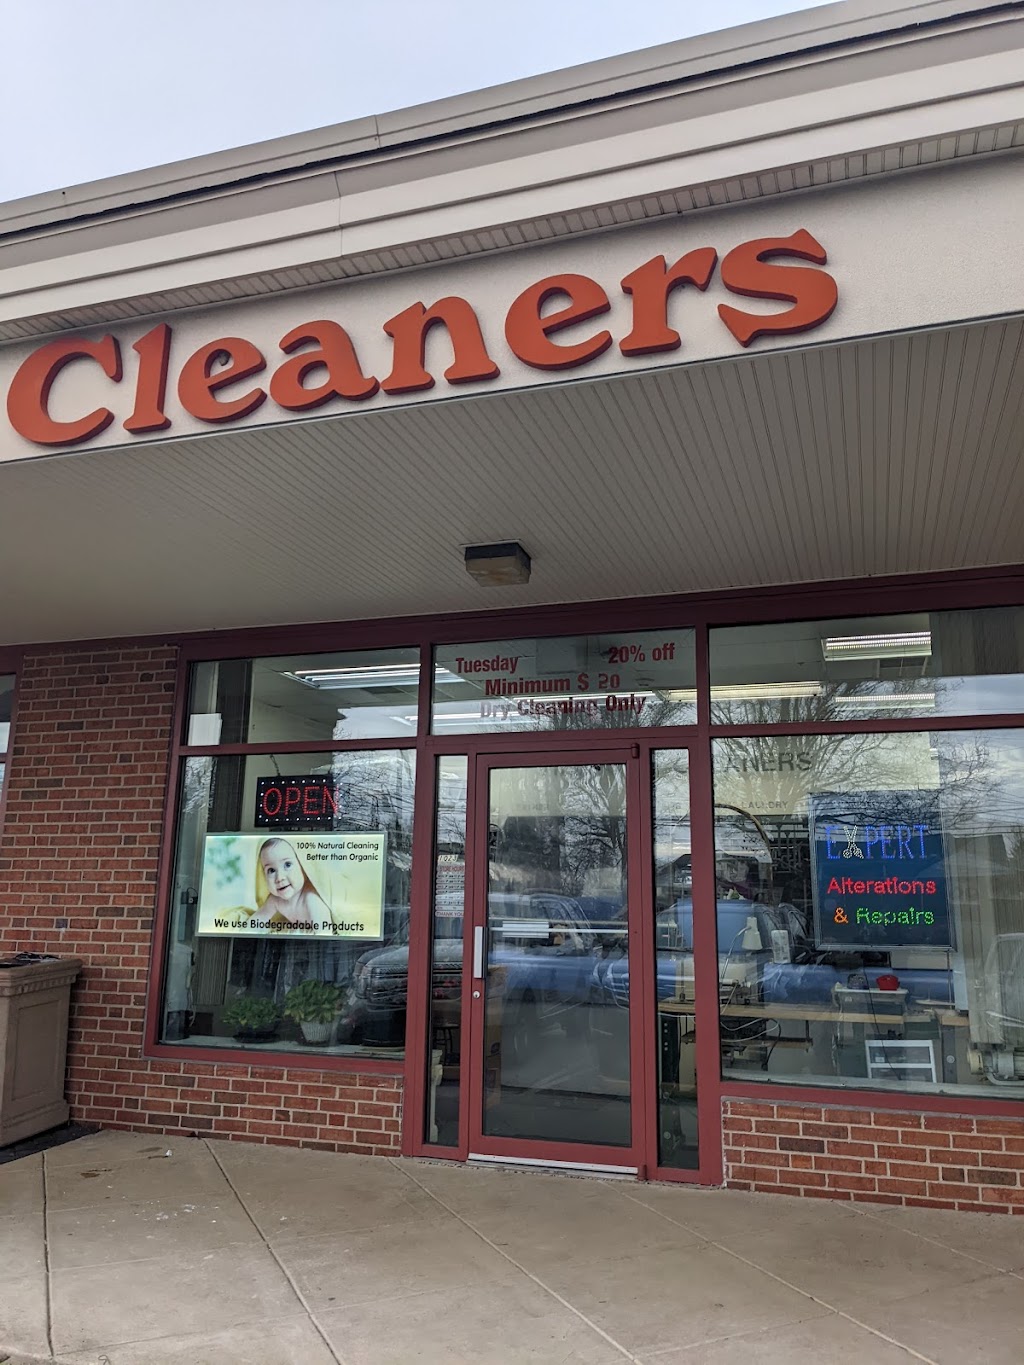 Village Cleaner | 1023 S Valley Forge Rd, Norristown, PA 19403 | Phone: (610) 539-4649